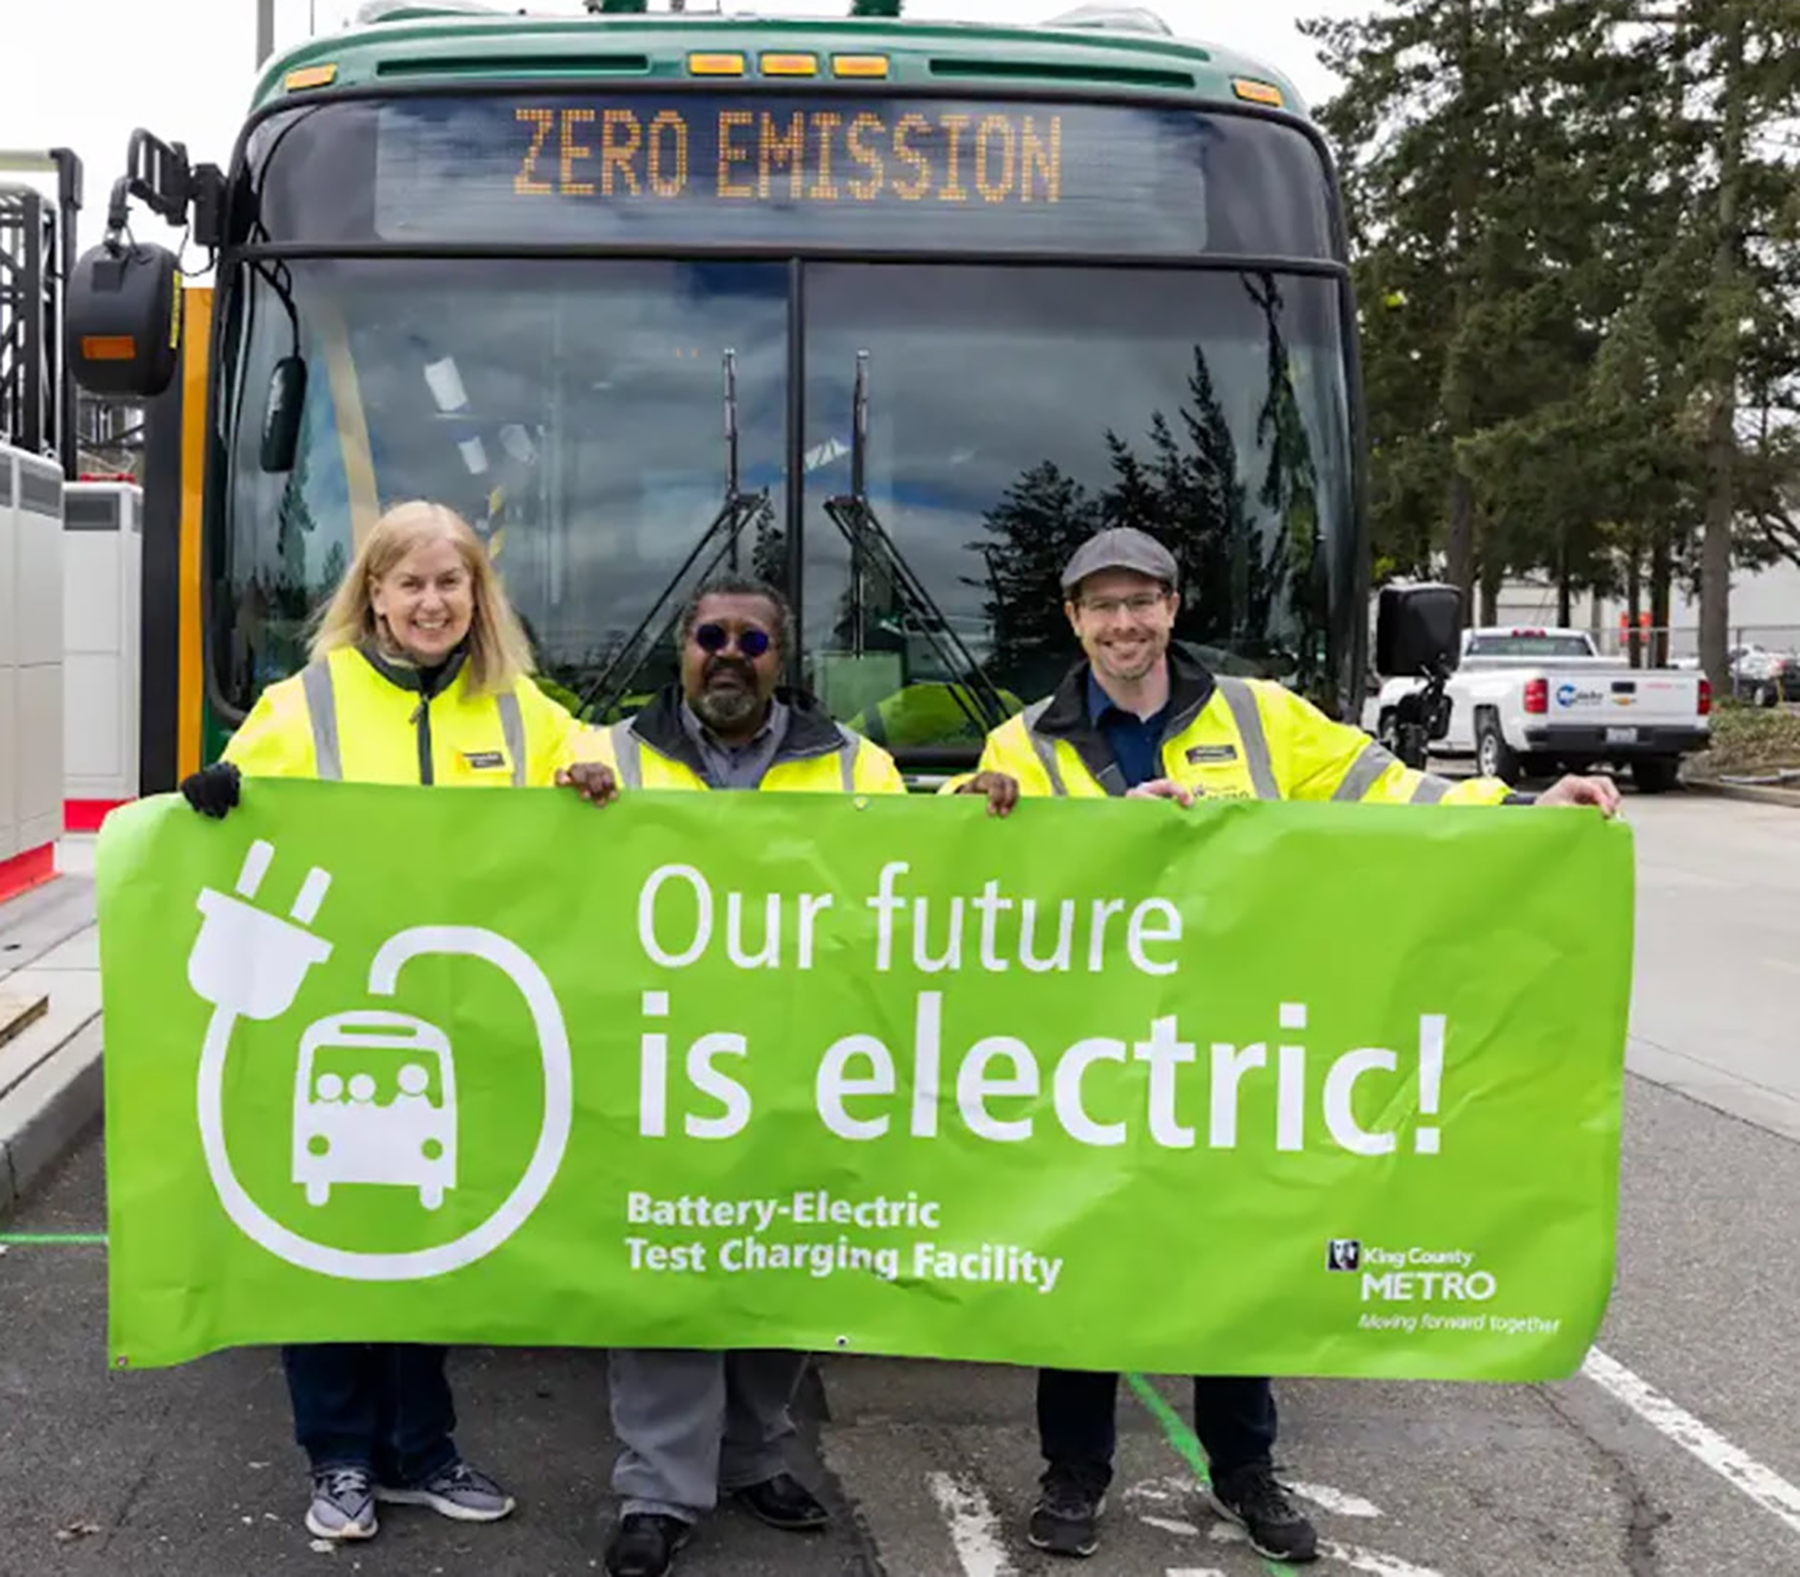 people smile with signs promoting electric buses